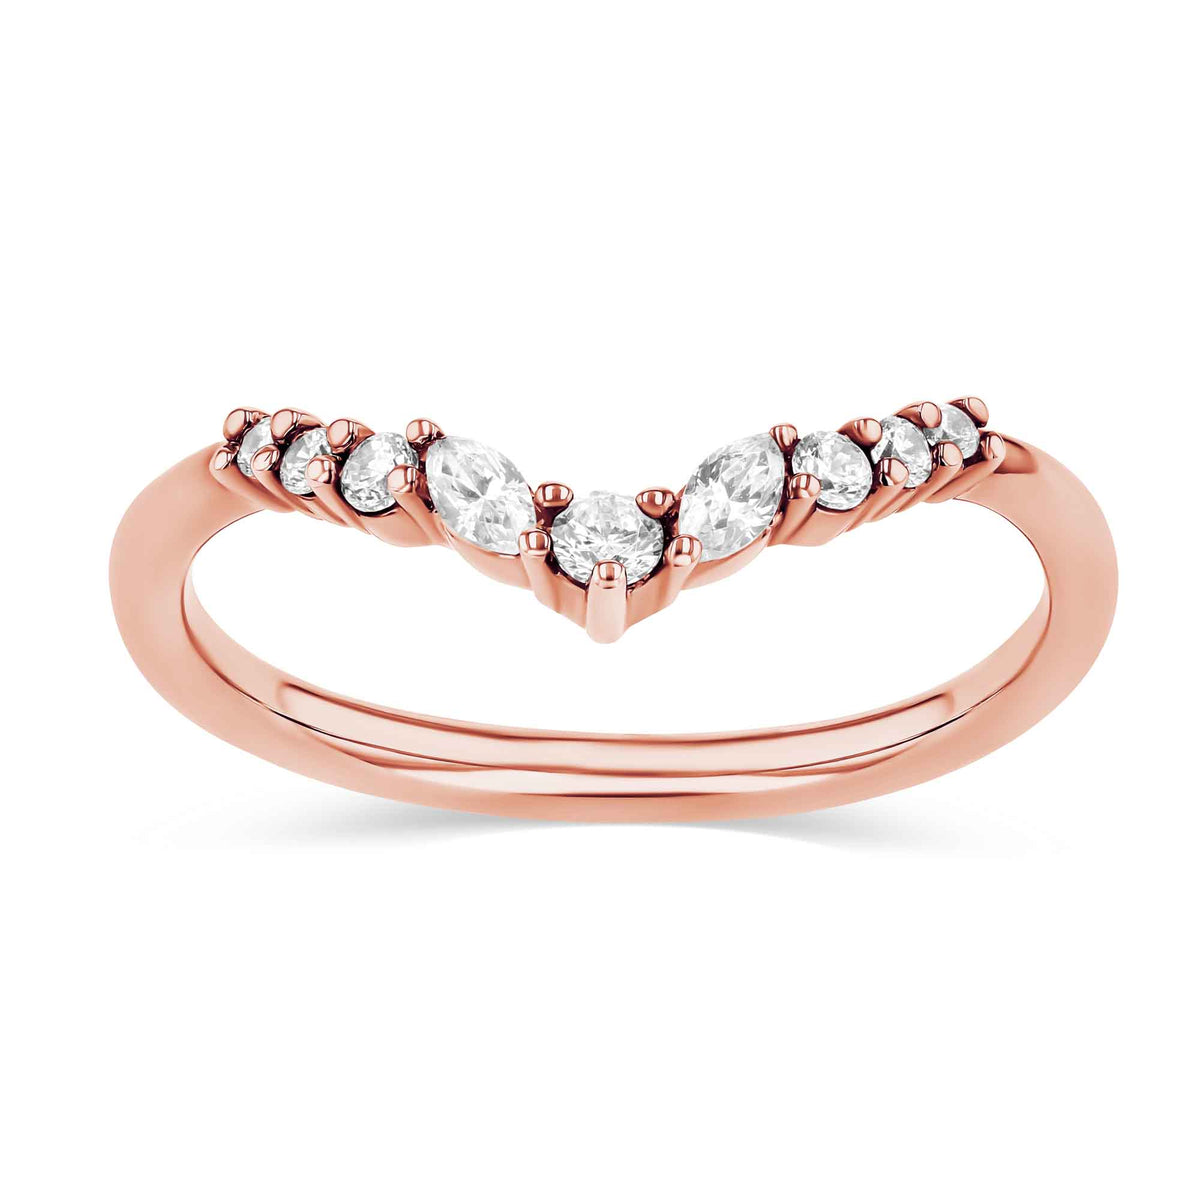 Shown in 14K Rose Gold|lab grown diamond beautiful accented contour wedding band in 14k rose gold metal